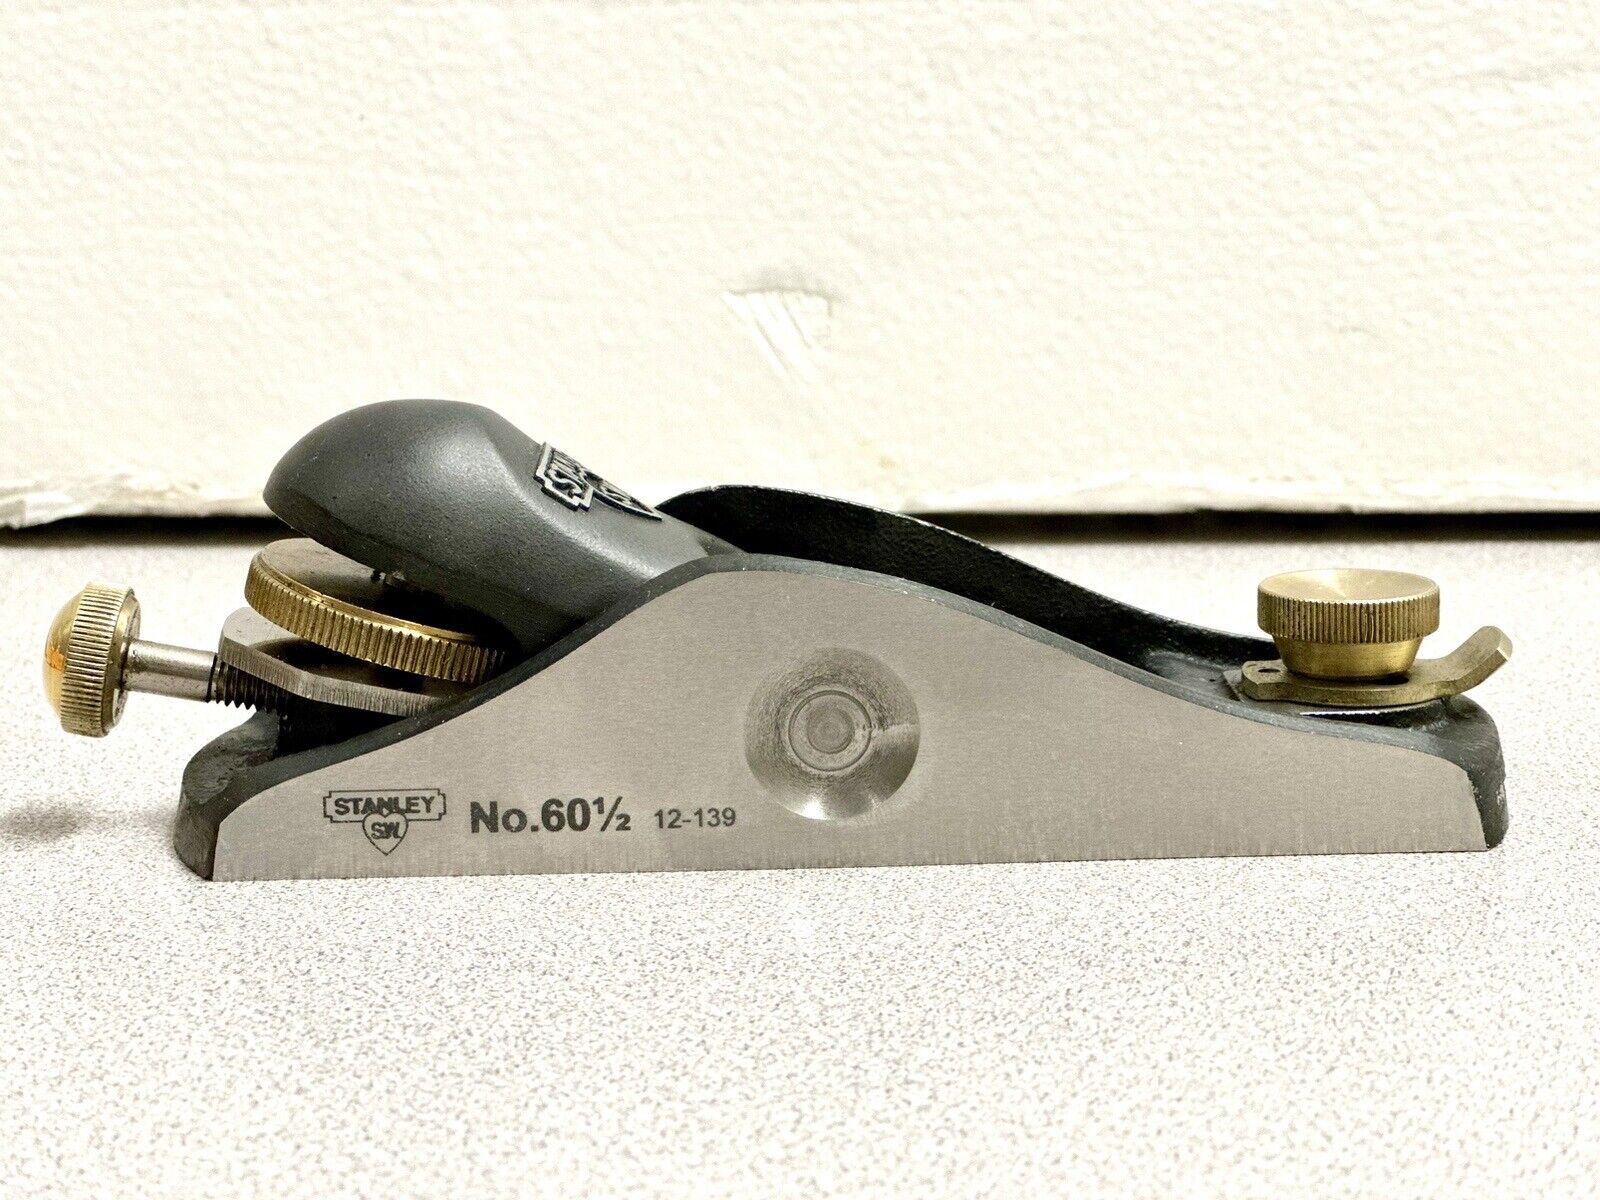 STANLEY No. 60-1/2 LOW ANGLE BLOCK PLANE - Flattened, Polished, Altra Sharp